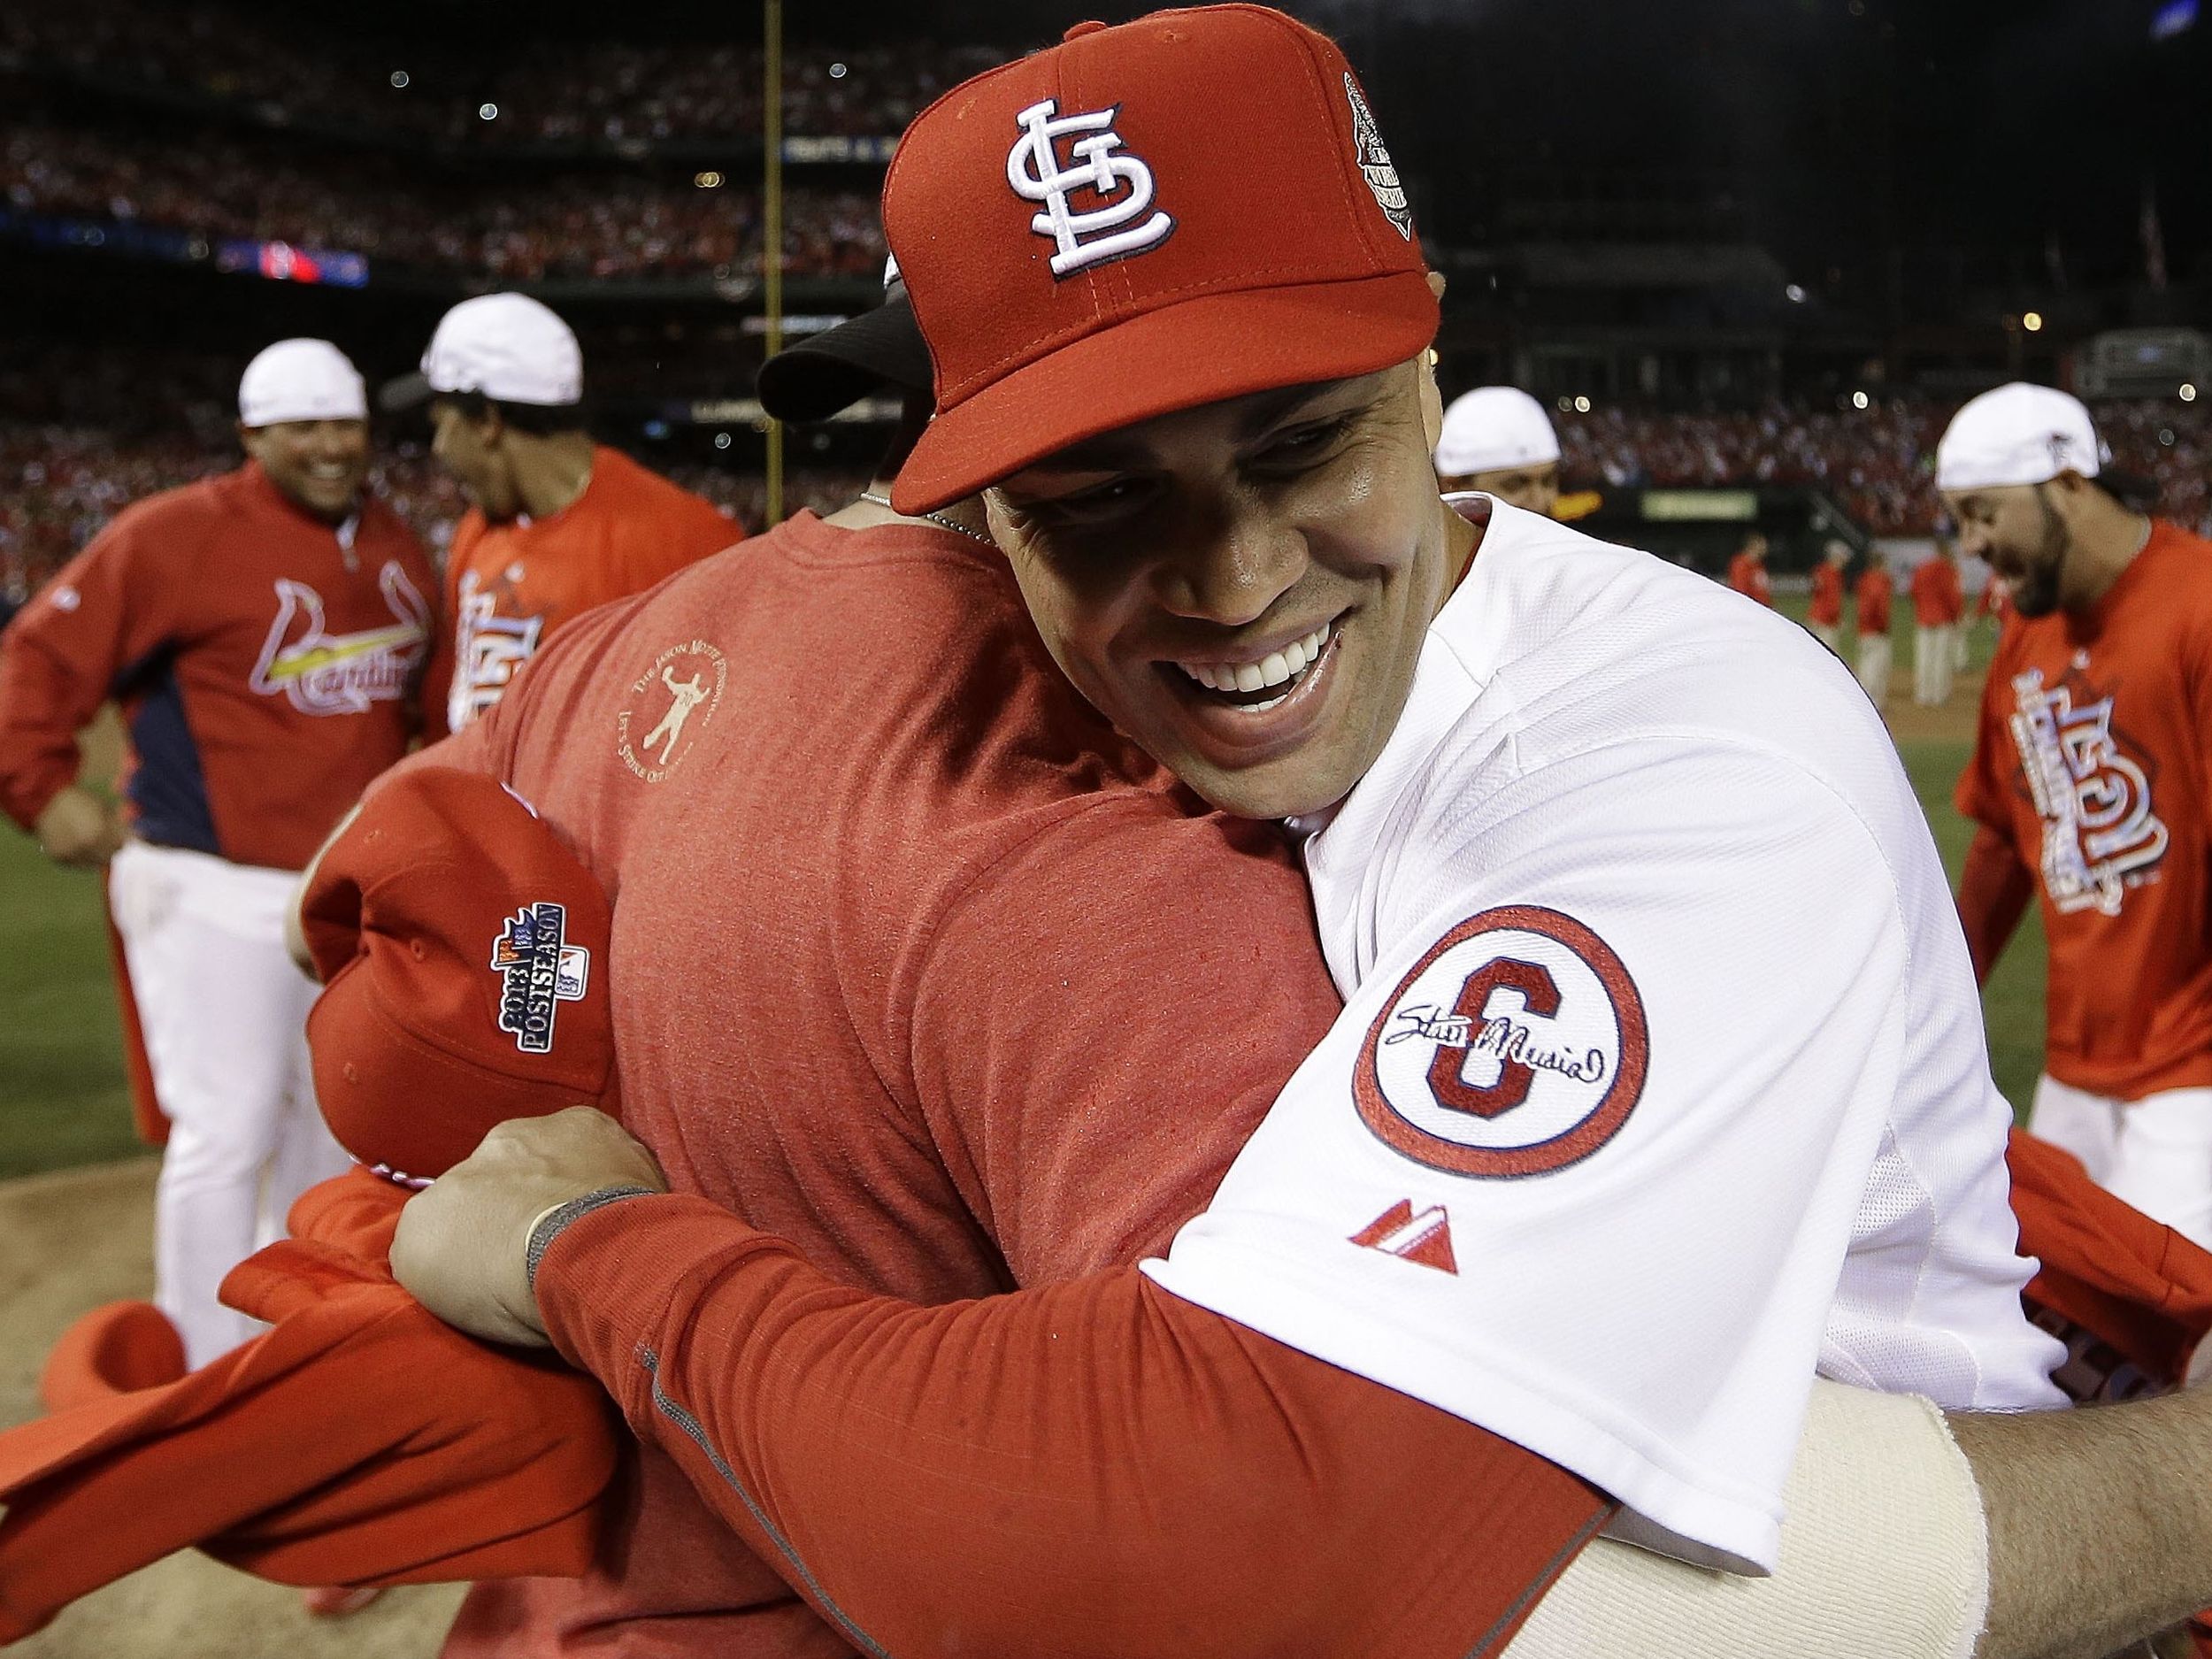 Cardinals rough up Kershaw, head to World Series